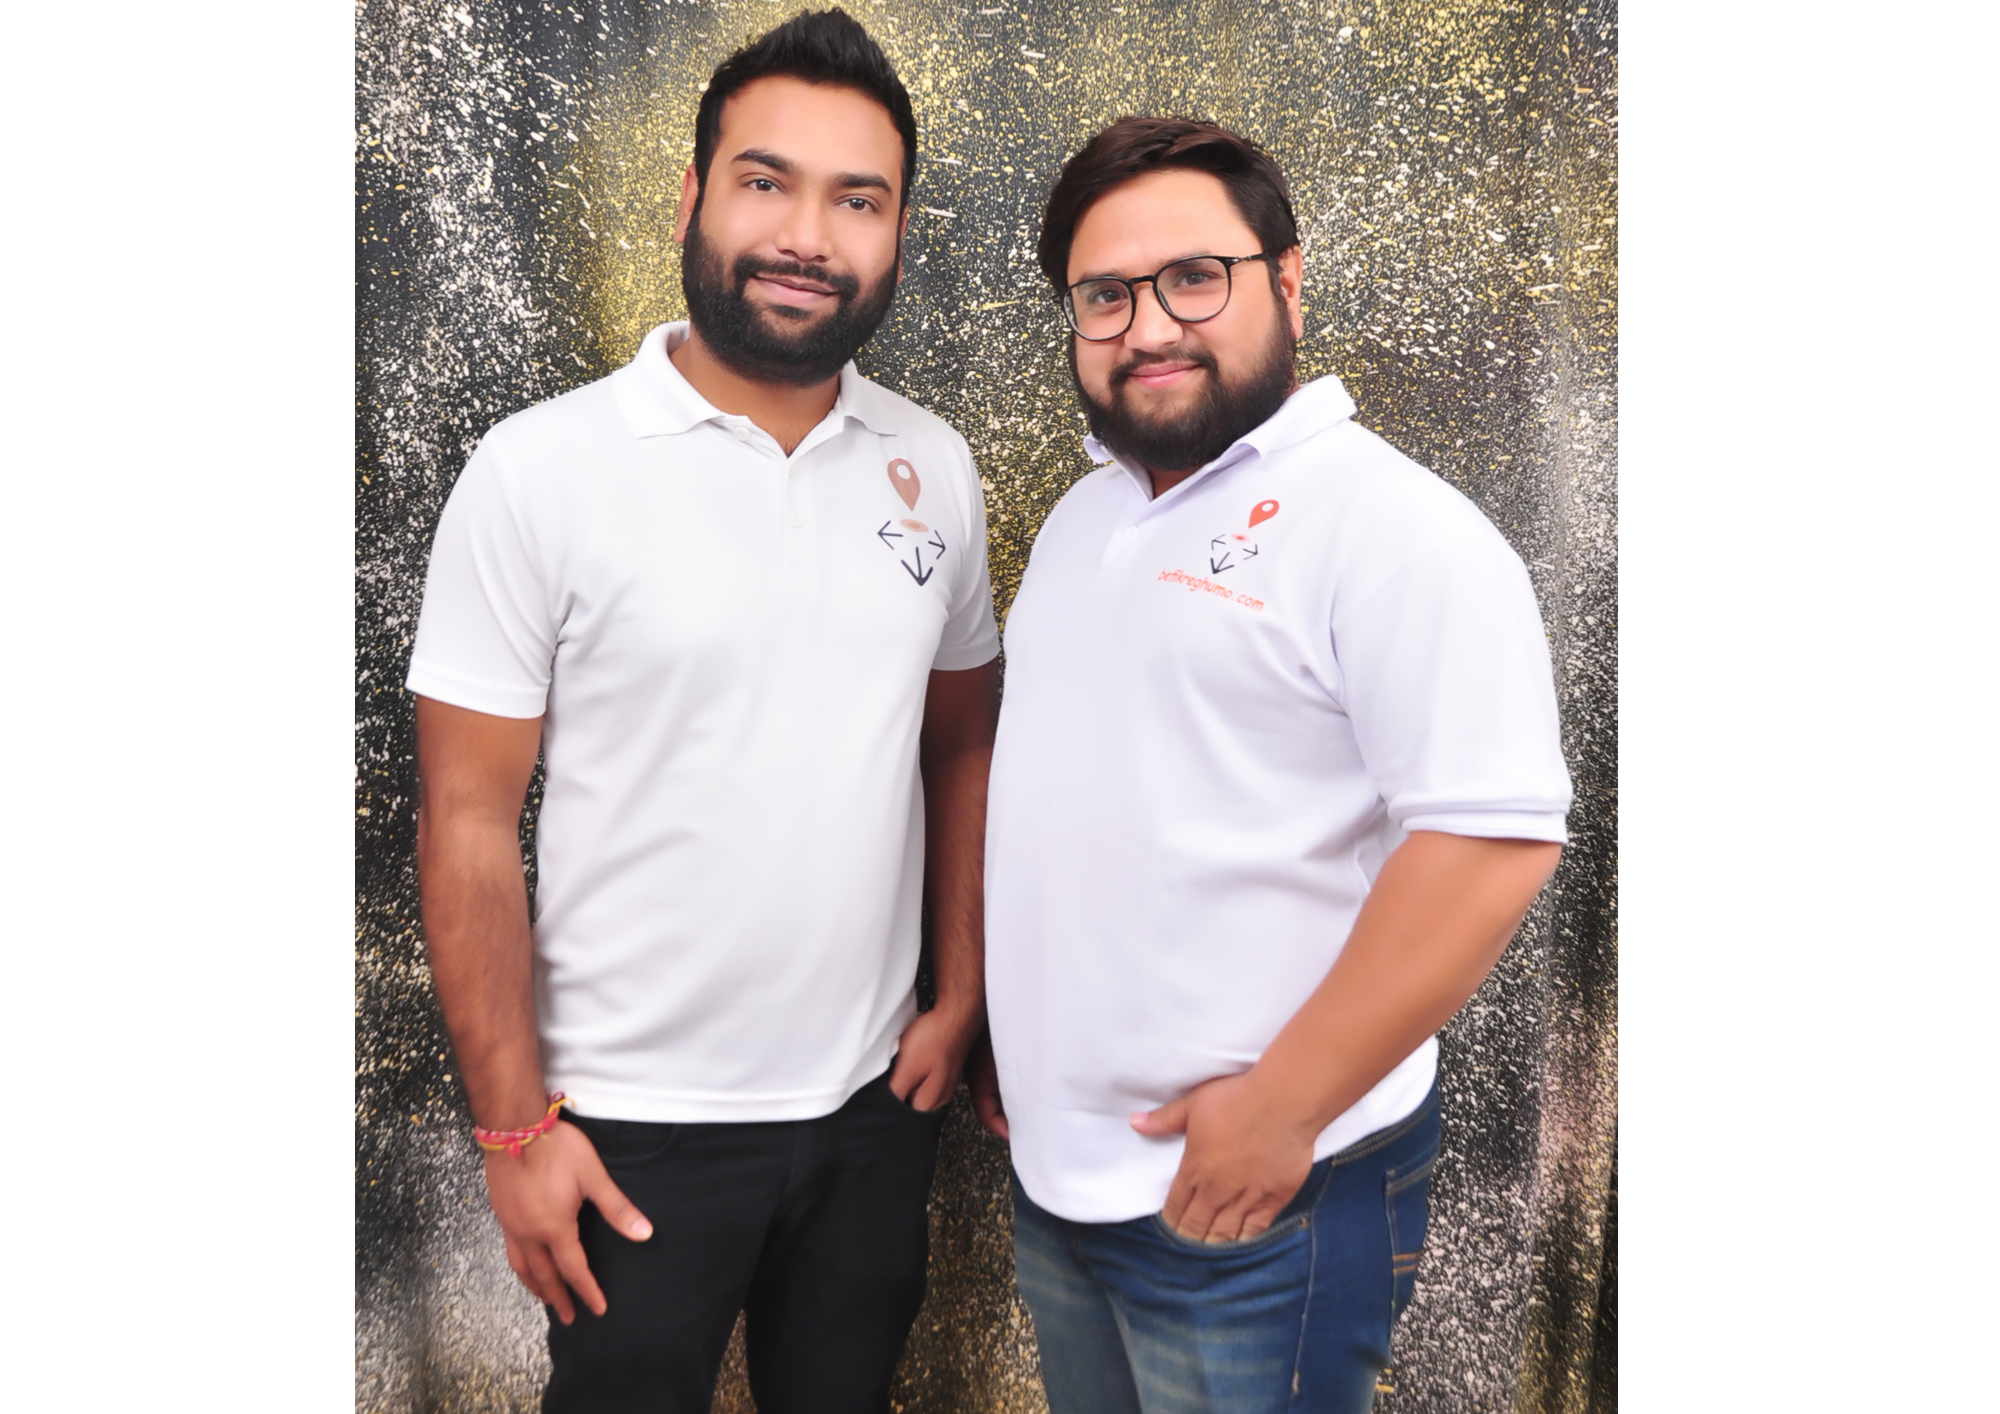 Turning their passion into a reality, know-how Manish and Mahesh founded Befikre Ghumo